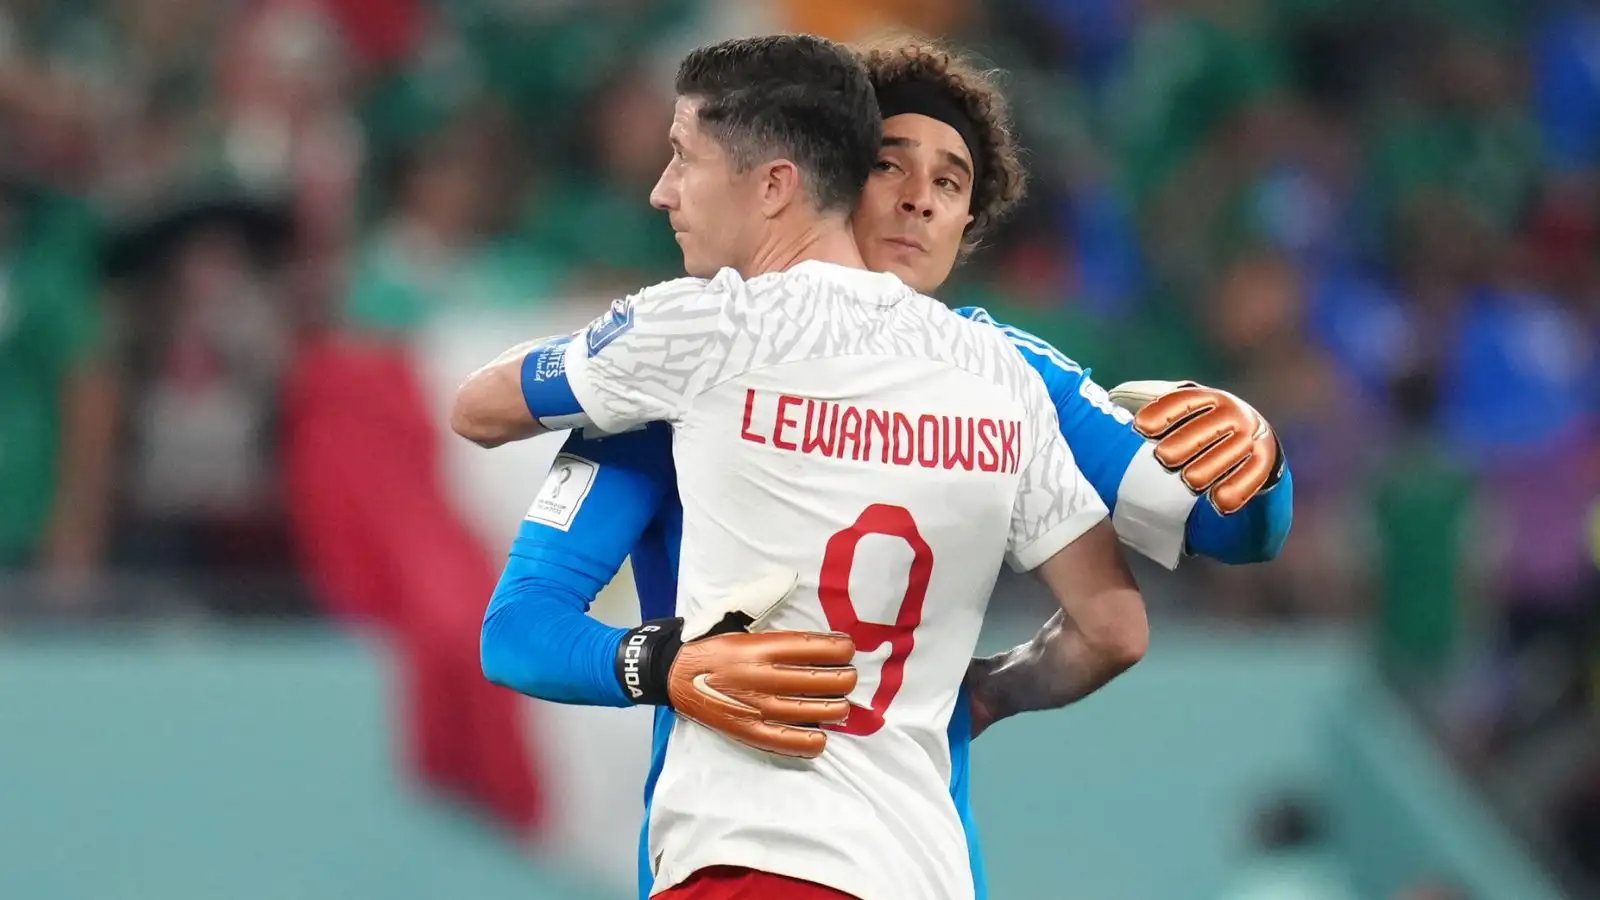 Robert Lewandowski and Guillermo Ochoa embrace after Poland and Mexico draw 0-0 at the 2022 World Cup